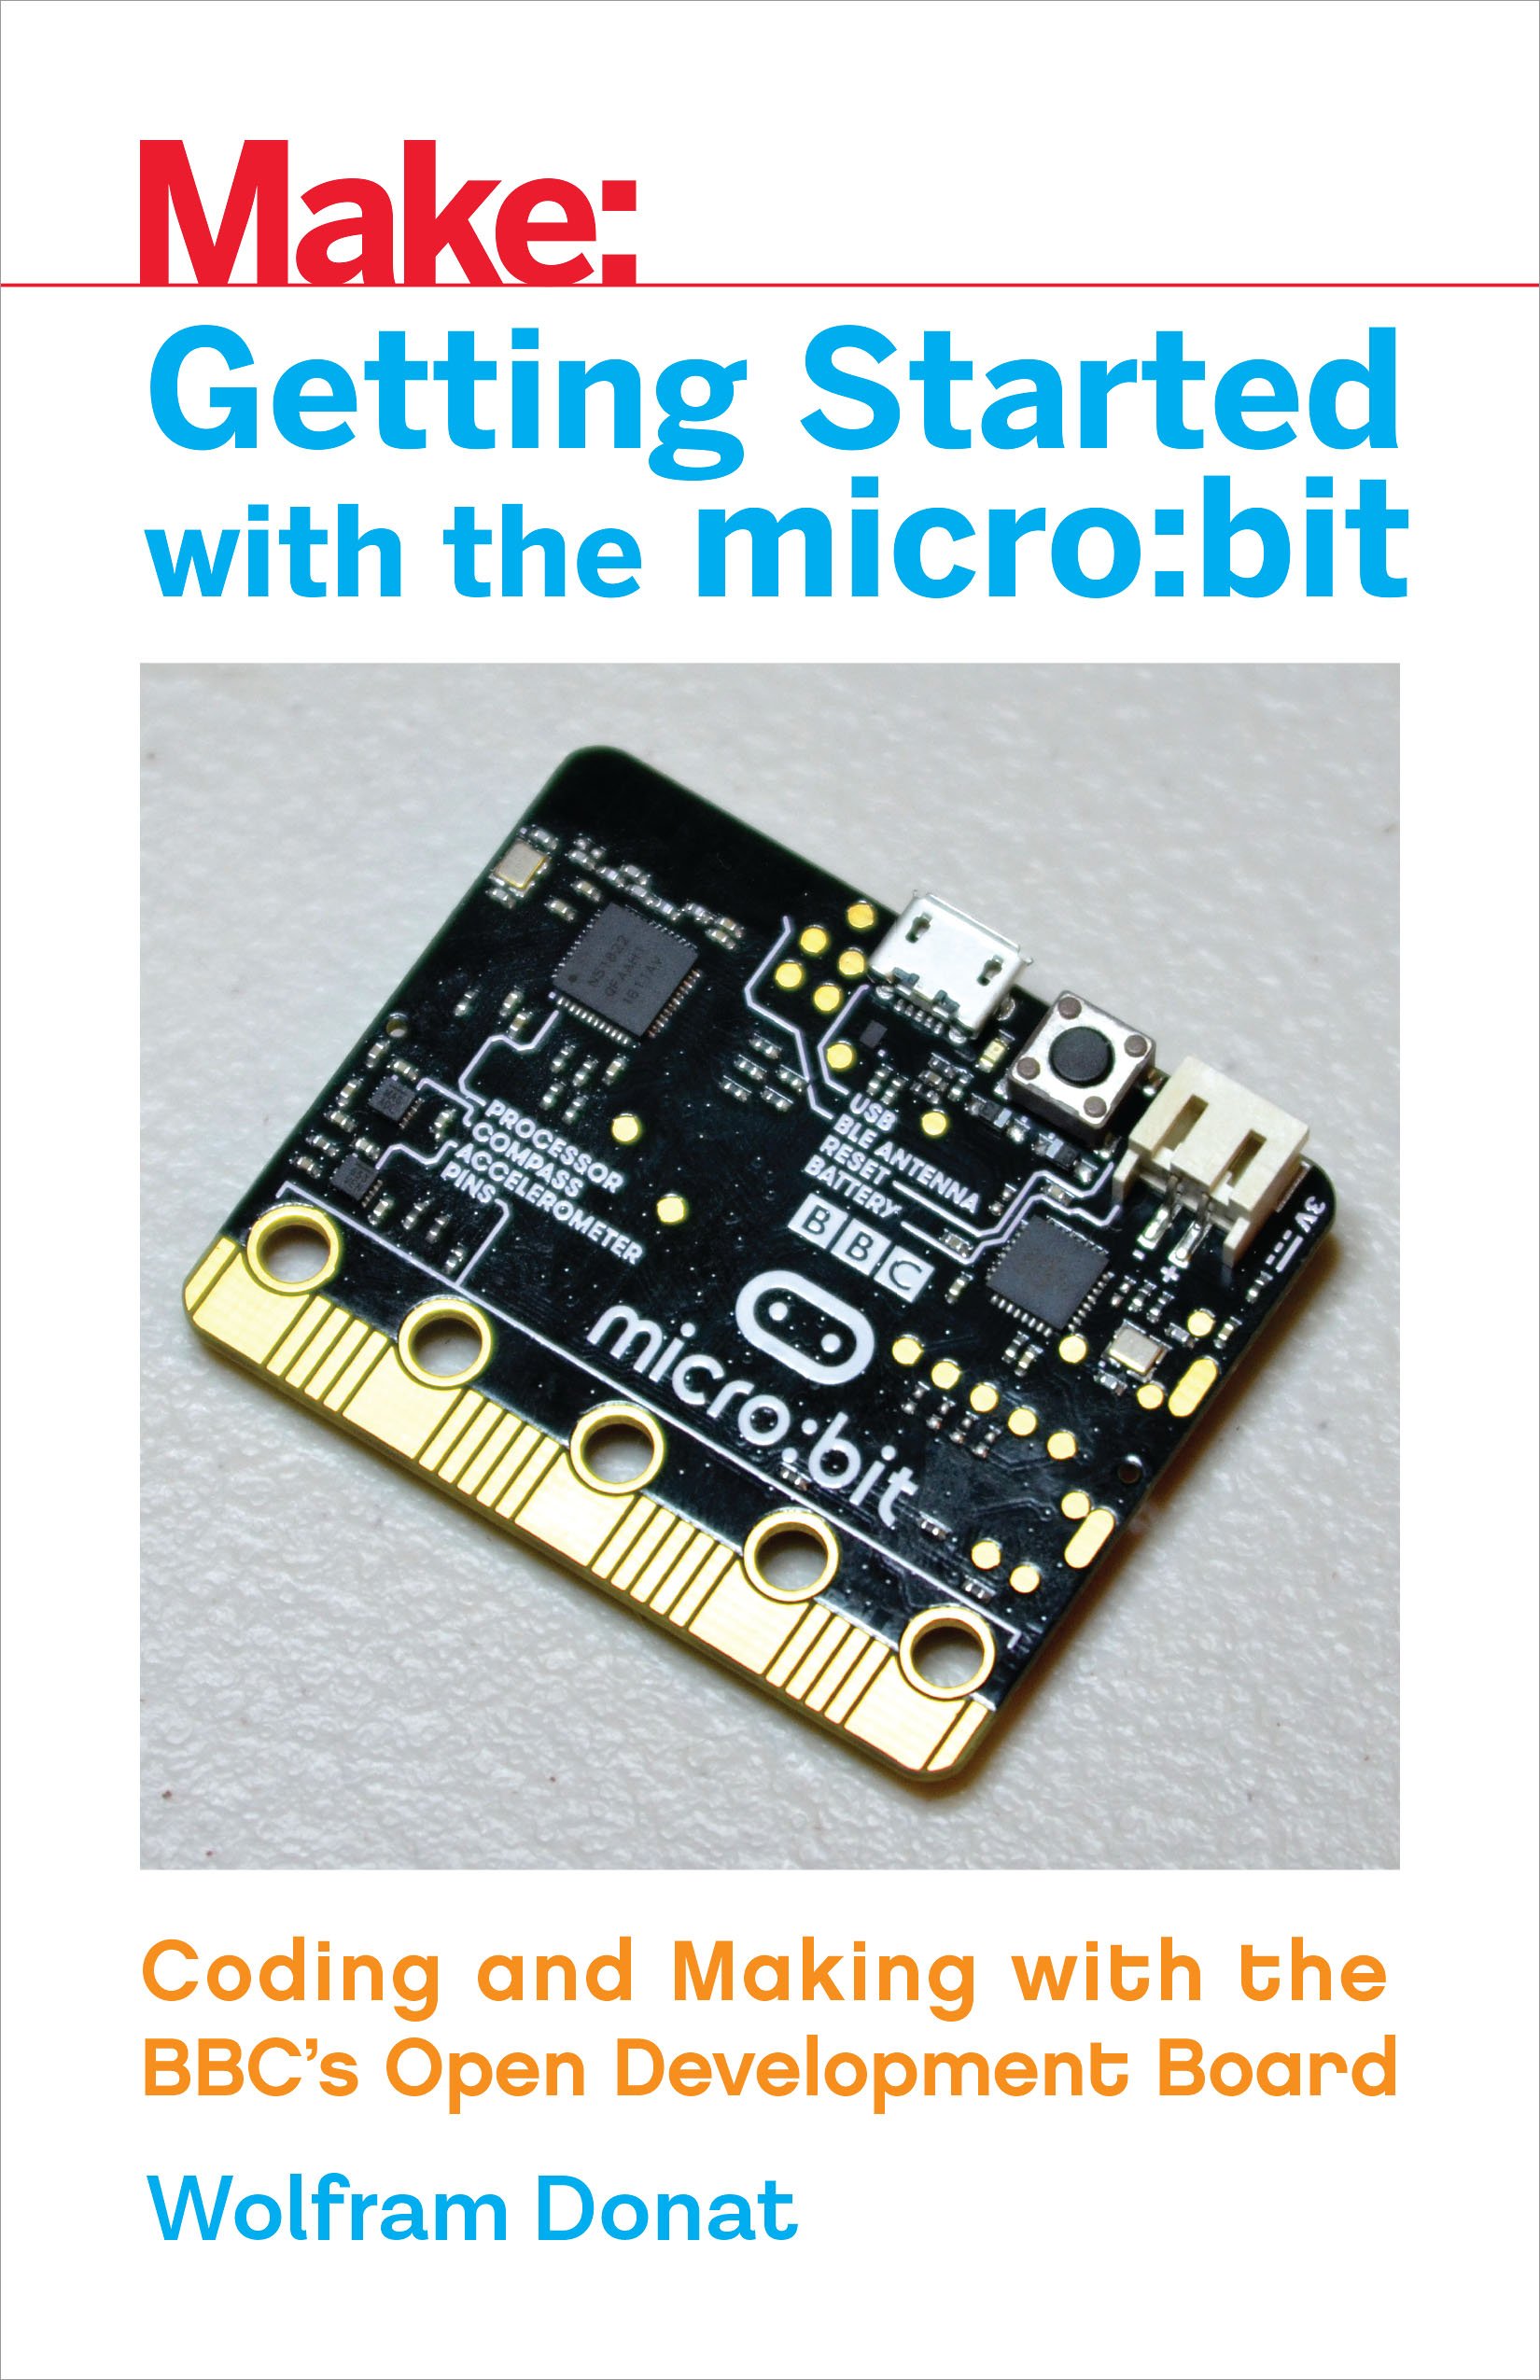 Getting Started with the micro:bit: Coding and Making with the BBC's Open Development Board (Make)